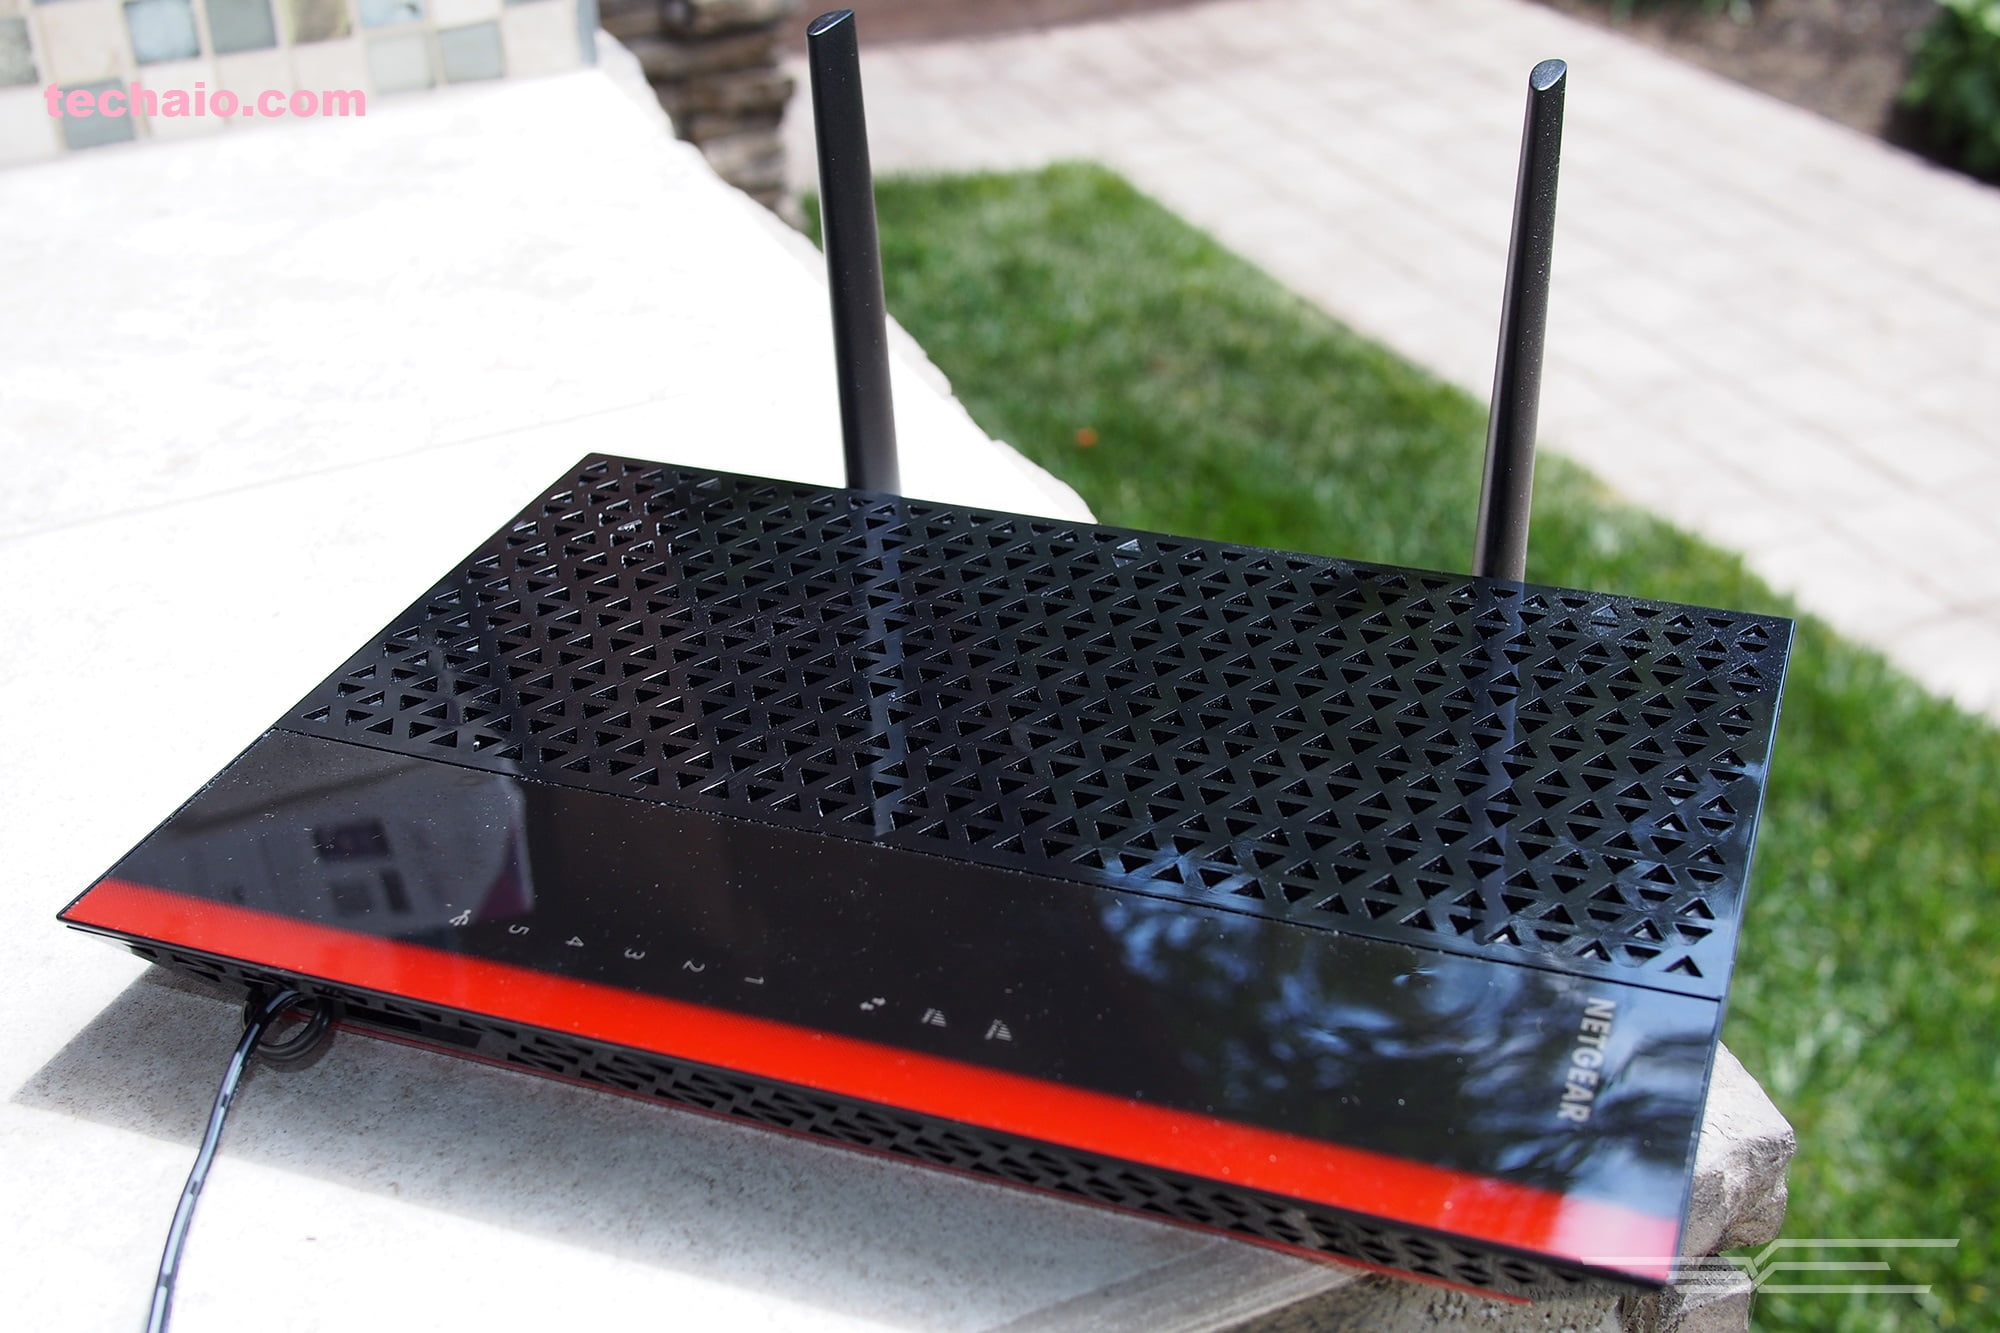 Top 5 best Wi-Fi routers